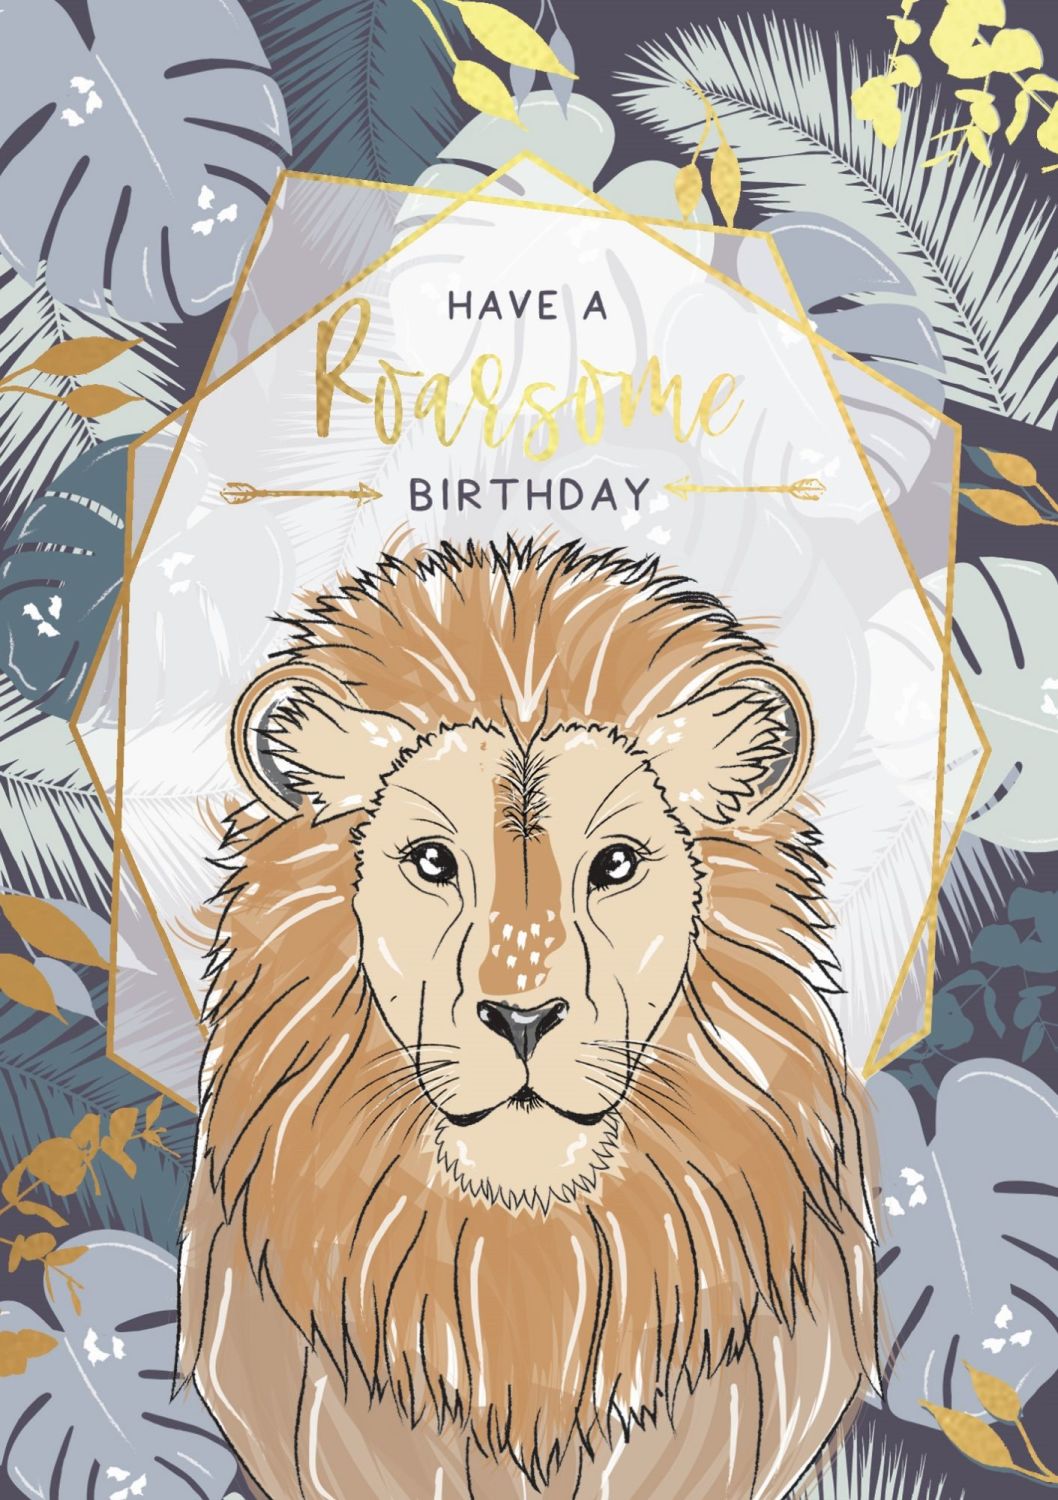 Have A Roarsome Birthday - BIRTHDAY Cards For HIM - LION Birthday CARDS - F